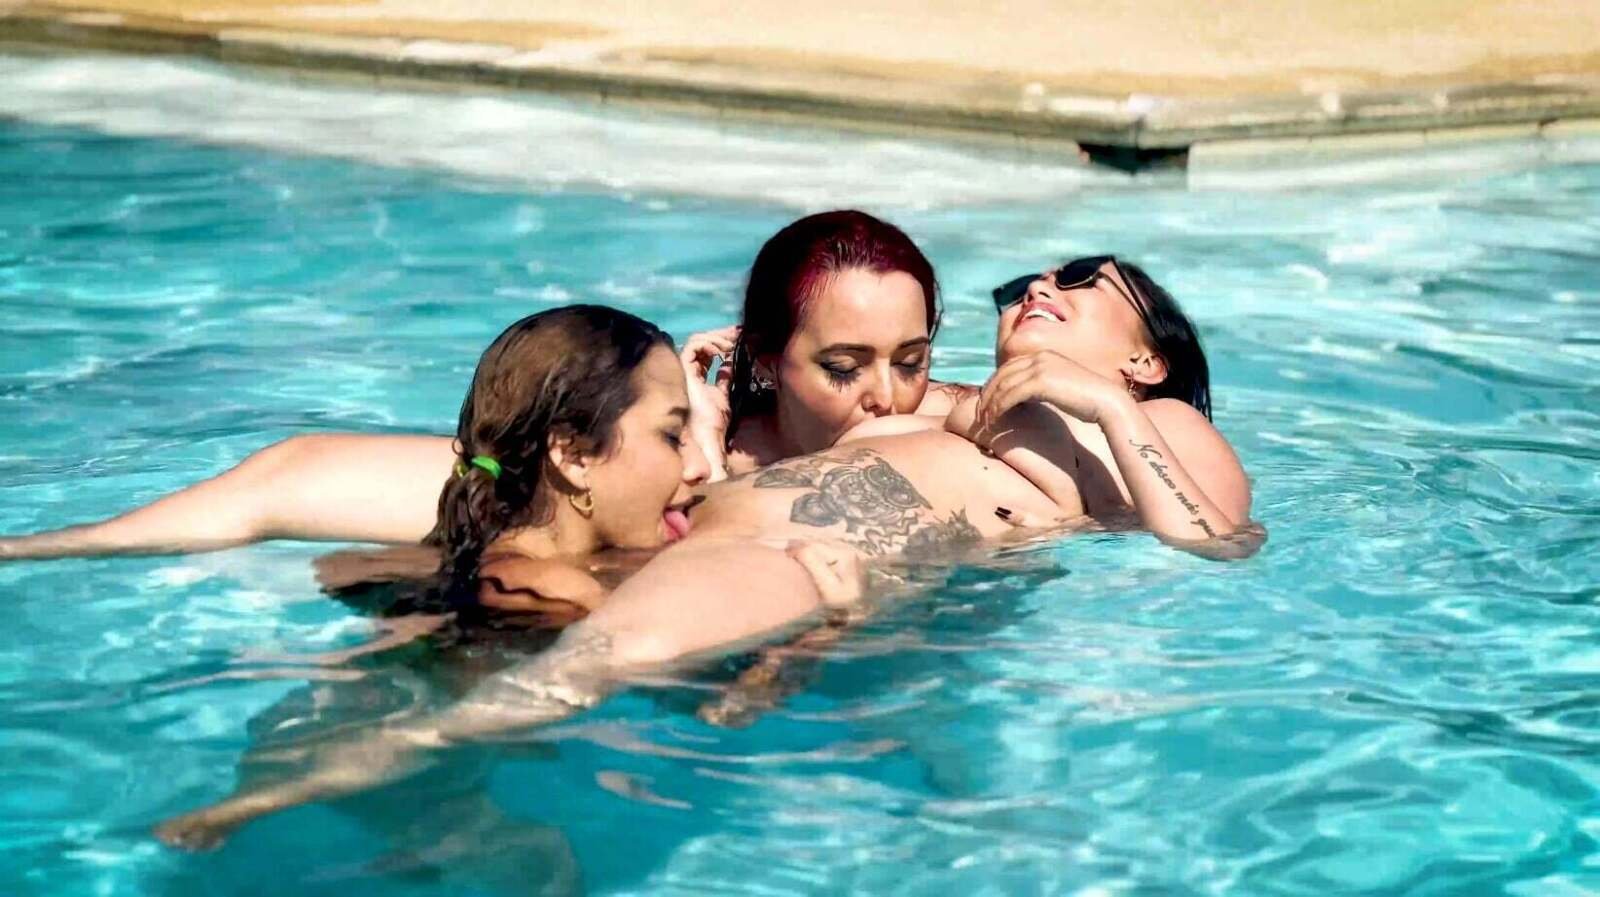 My friends challenge me to do mischief in the pool, I accept and they make me very horny with the games.